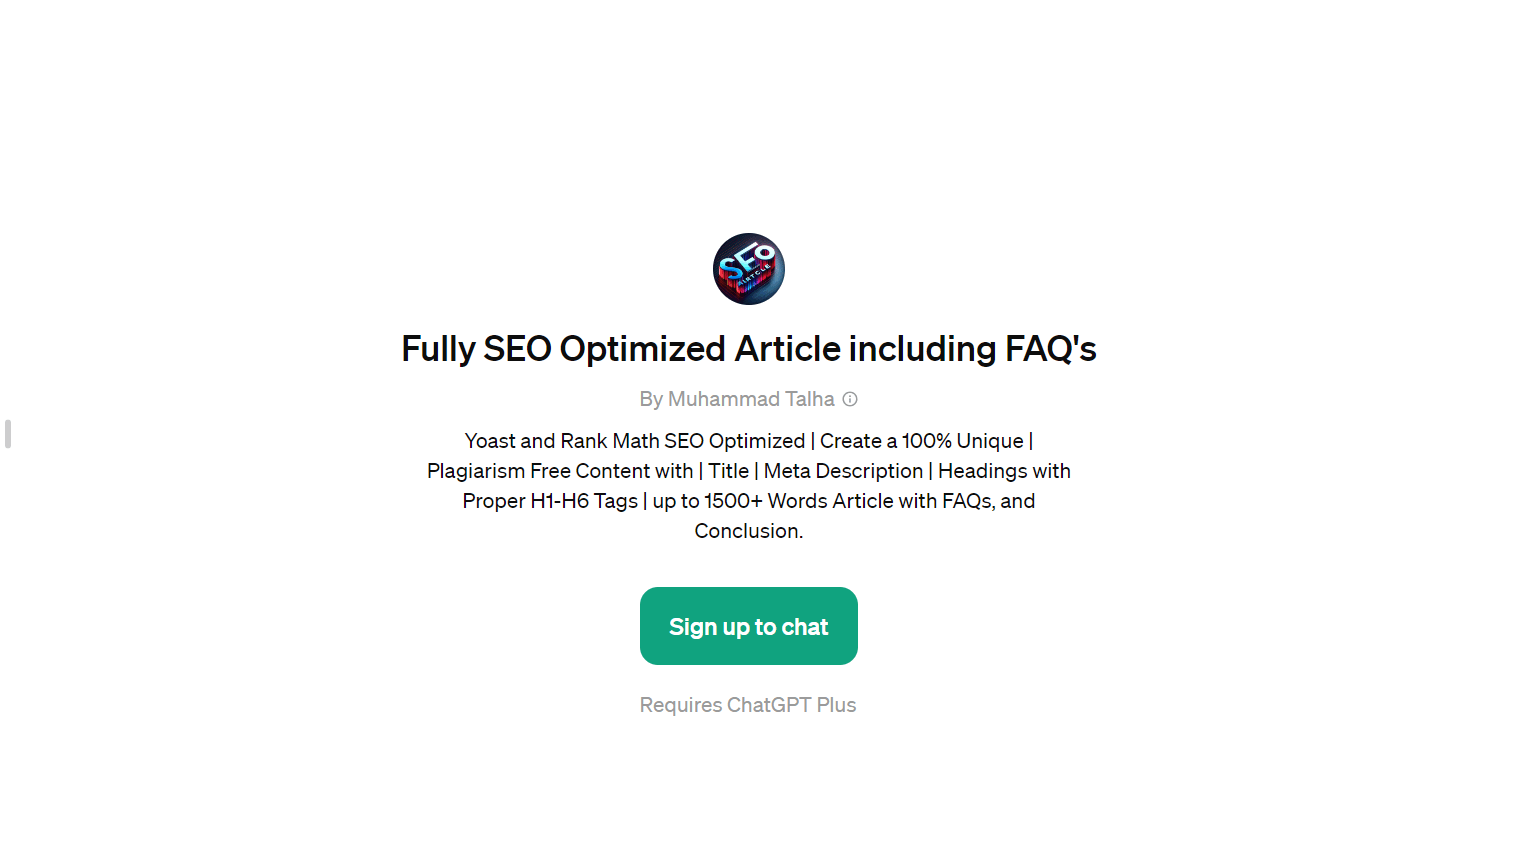 Fully SEO Optimized Article Including FAQ’s - Rank Your Content Higher